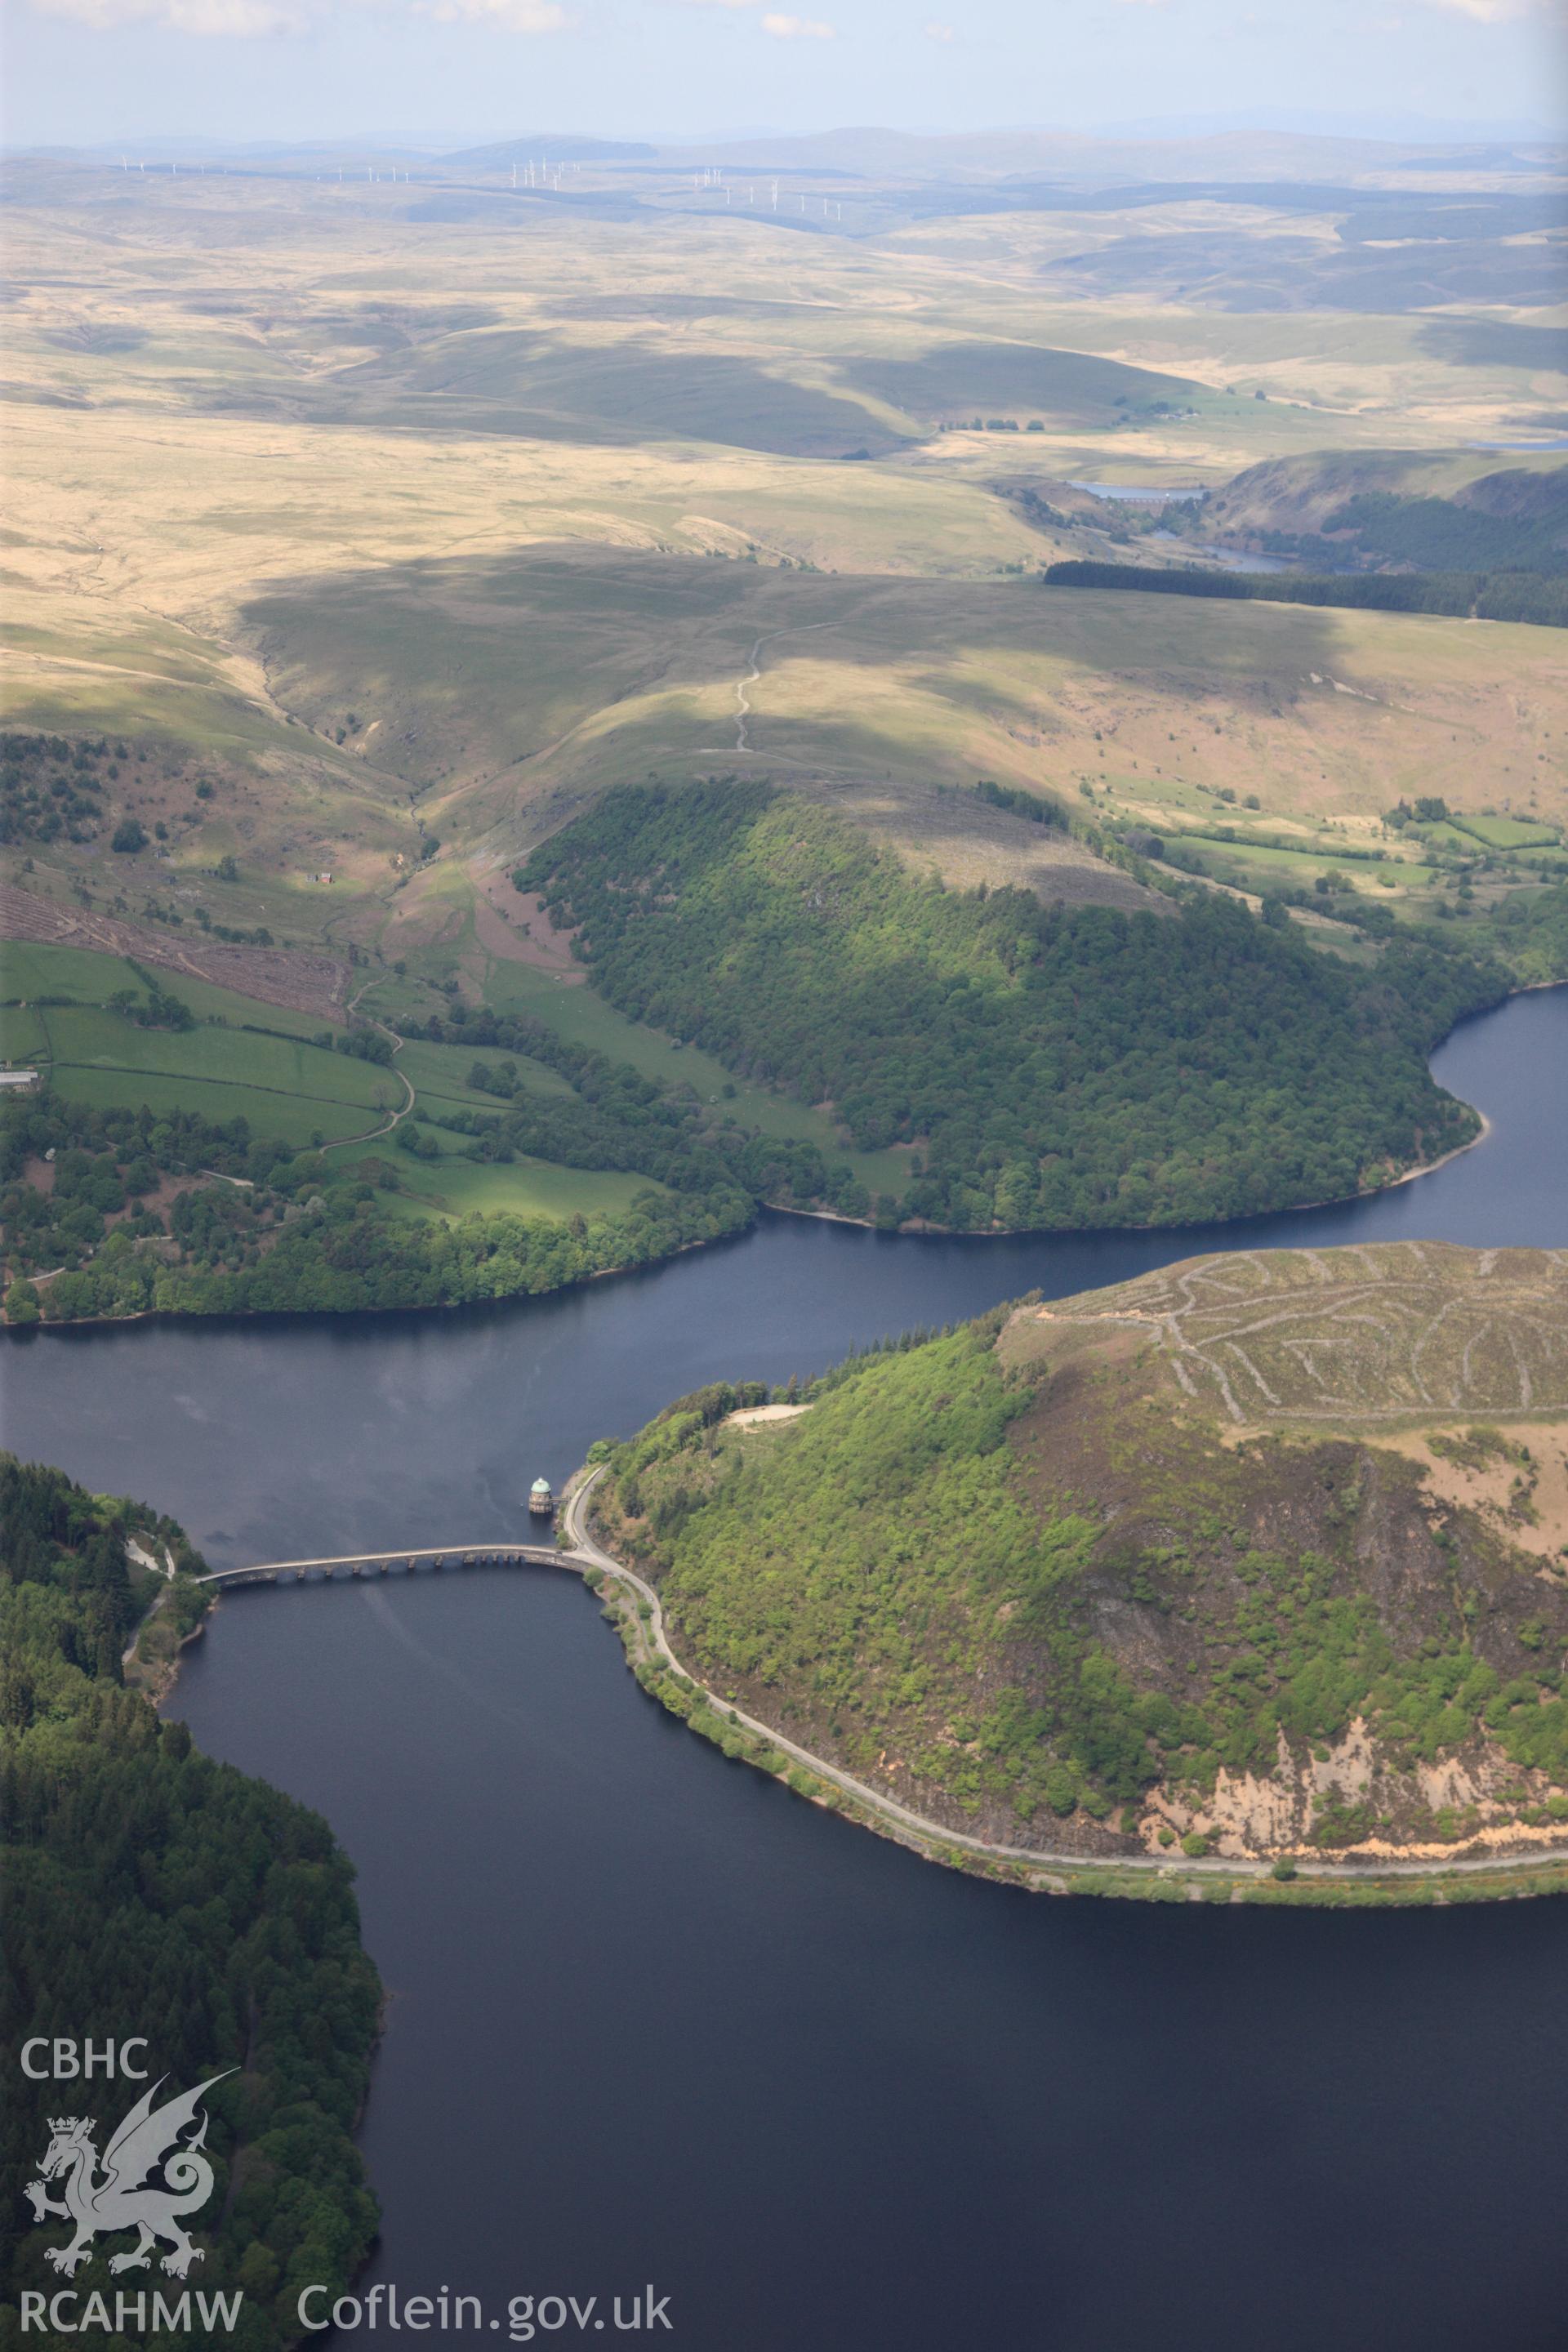 RCAHMW colour oblique photograph of Caban Coch reservoir. Taken by Toby Driver on 28/05/2012.